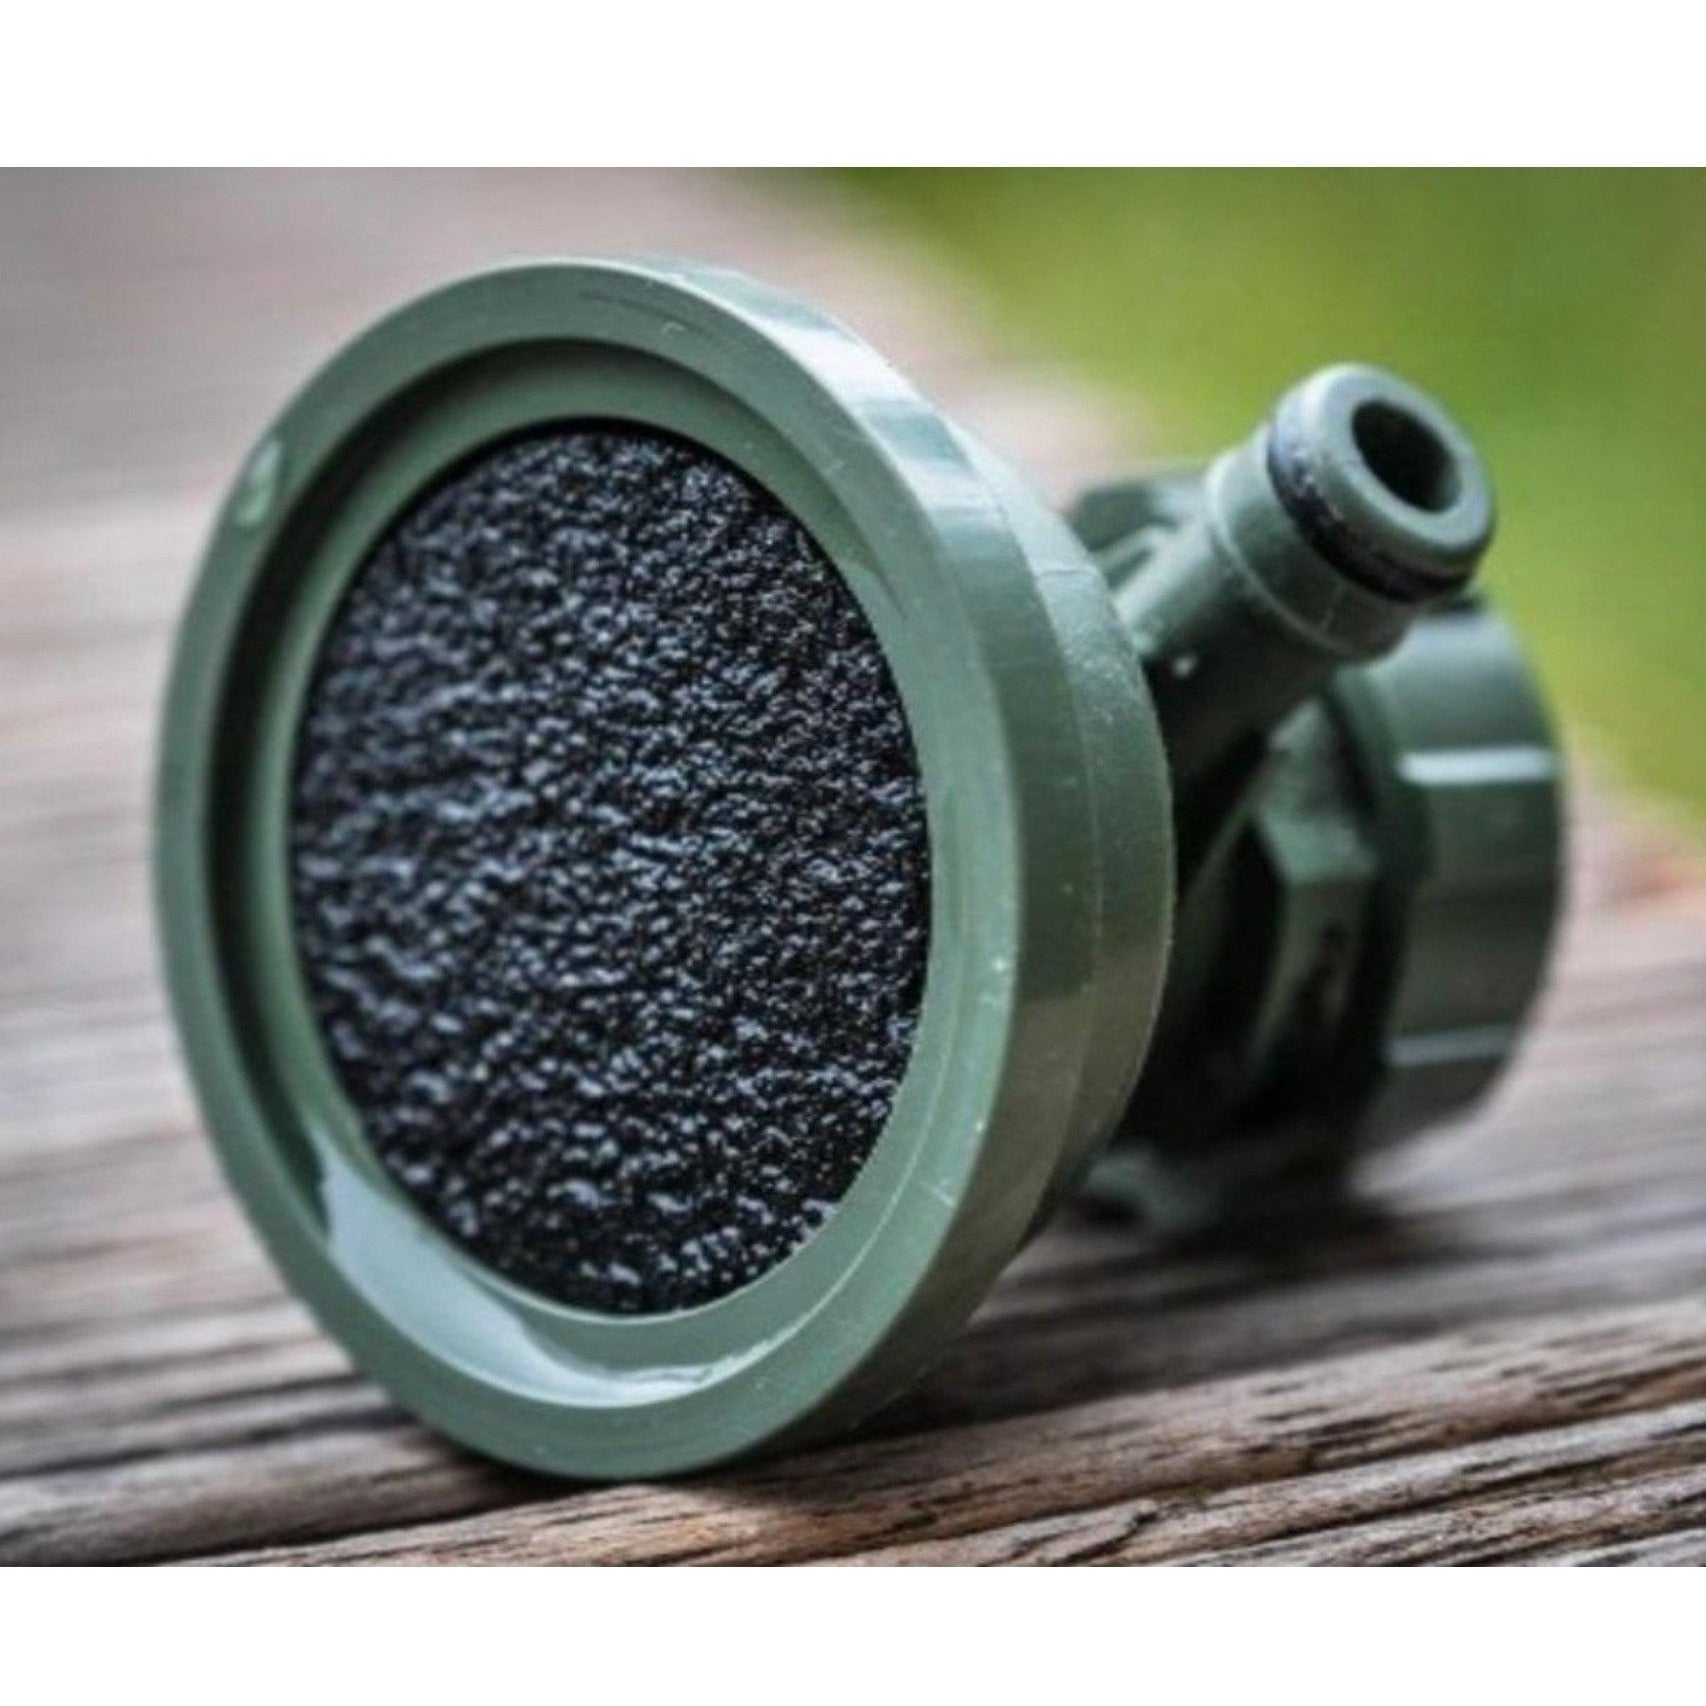 LifeSaver Jerry Can Activated Carbon Filters